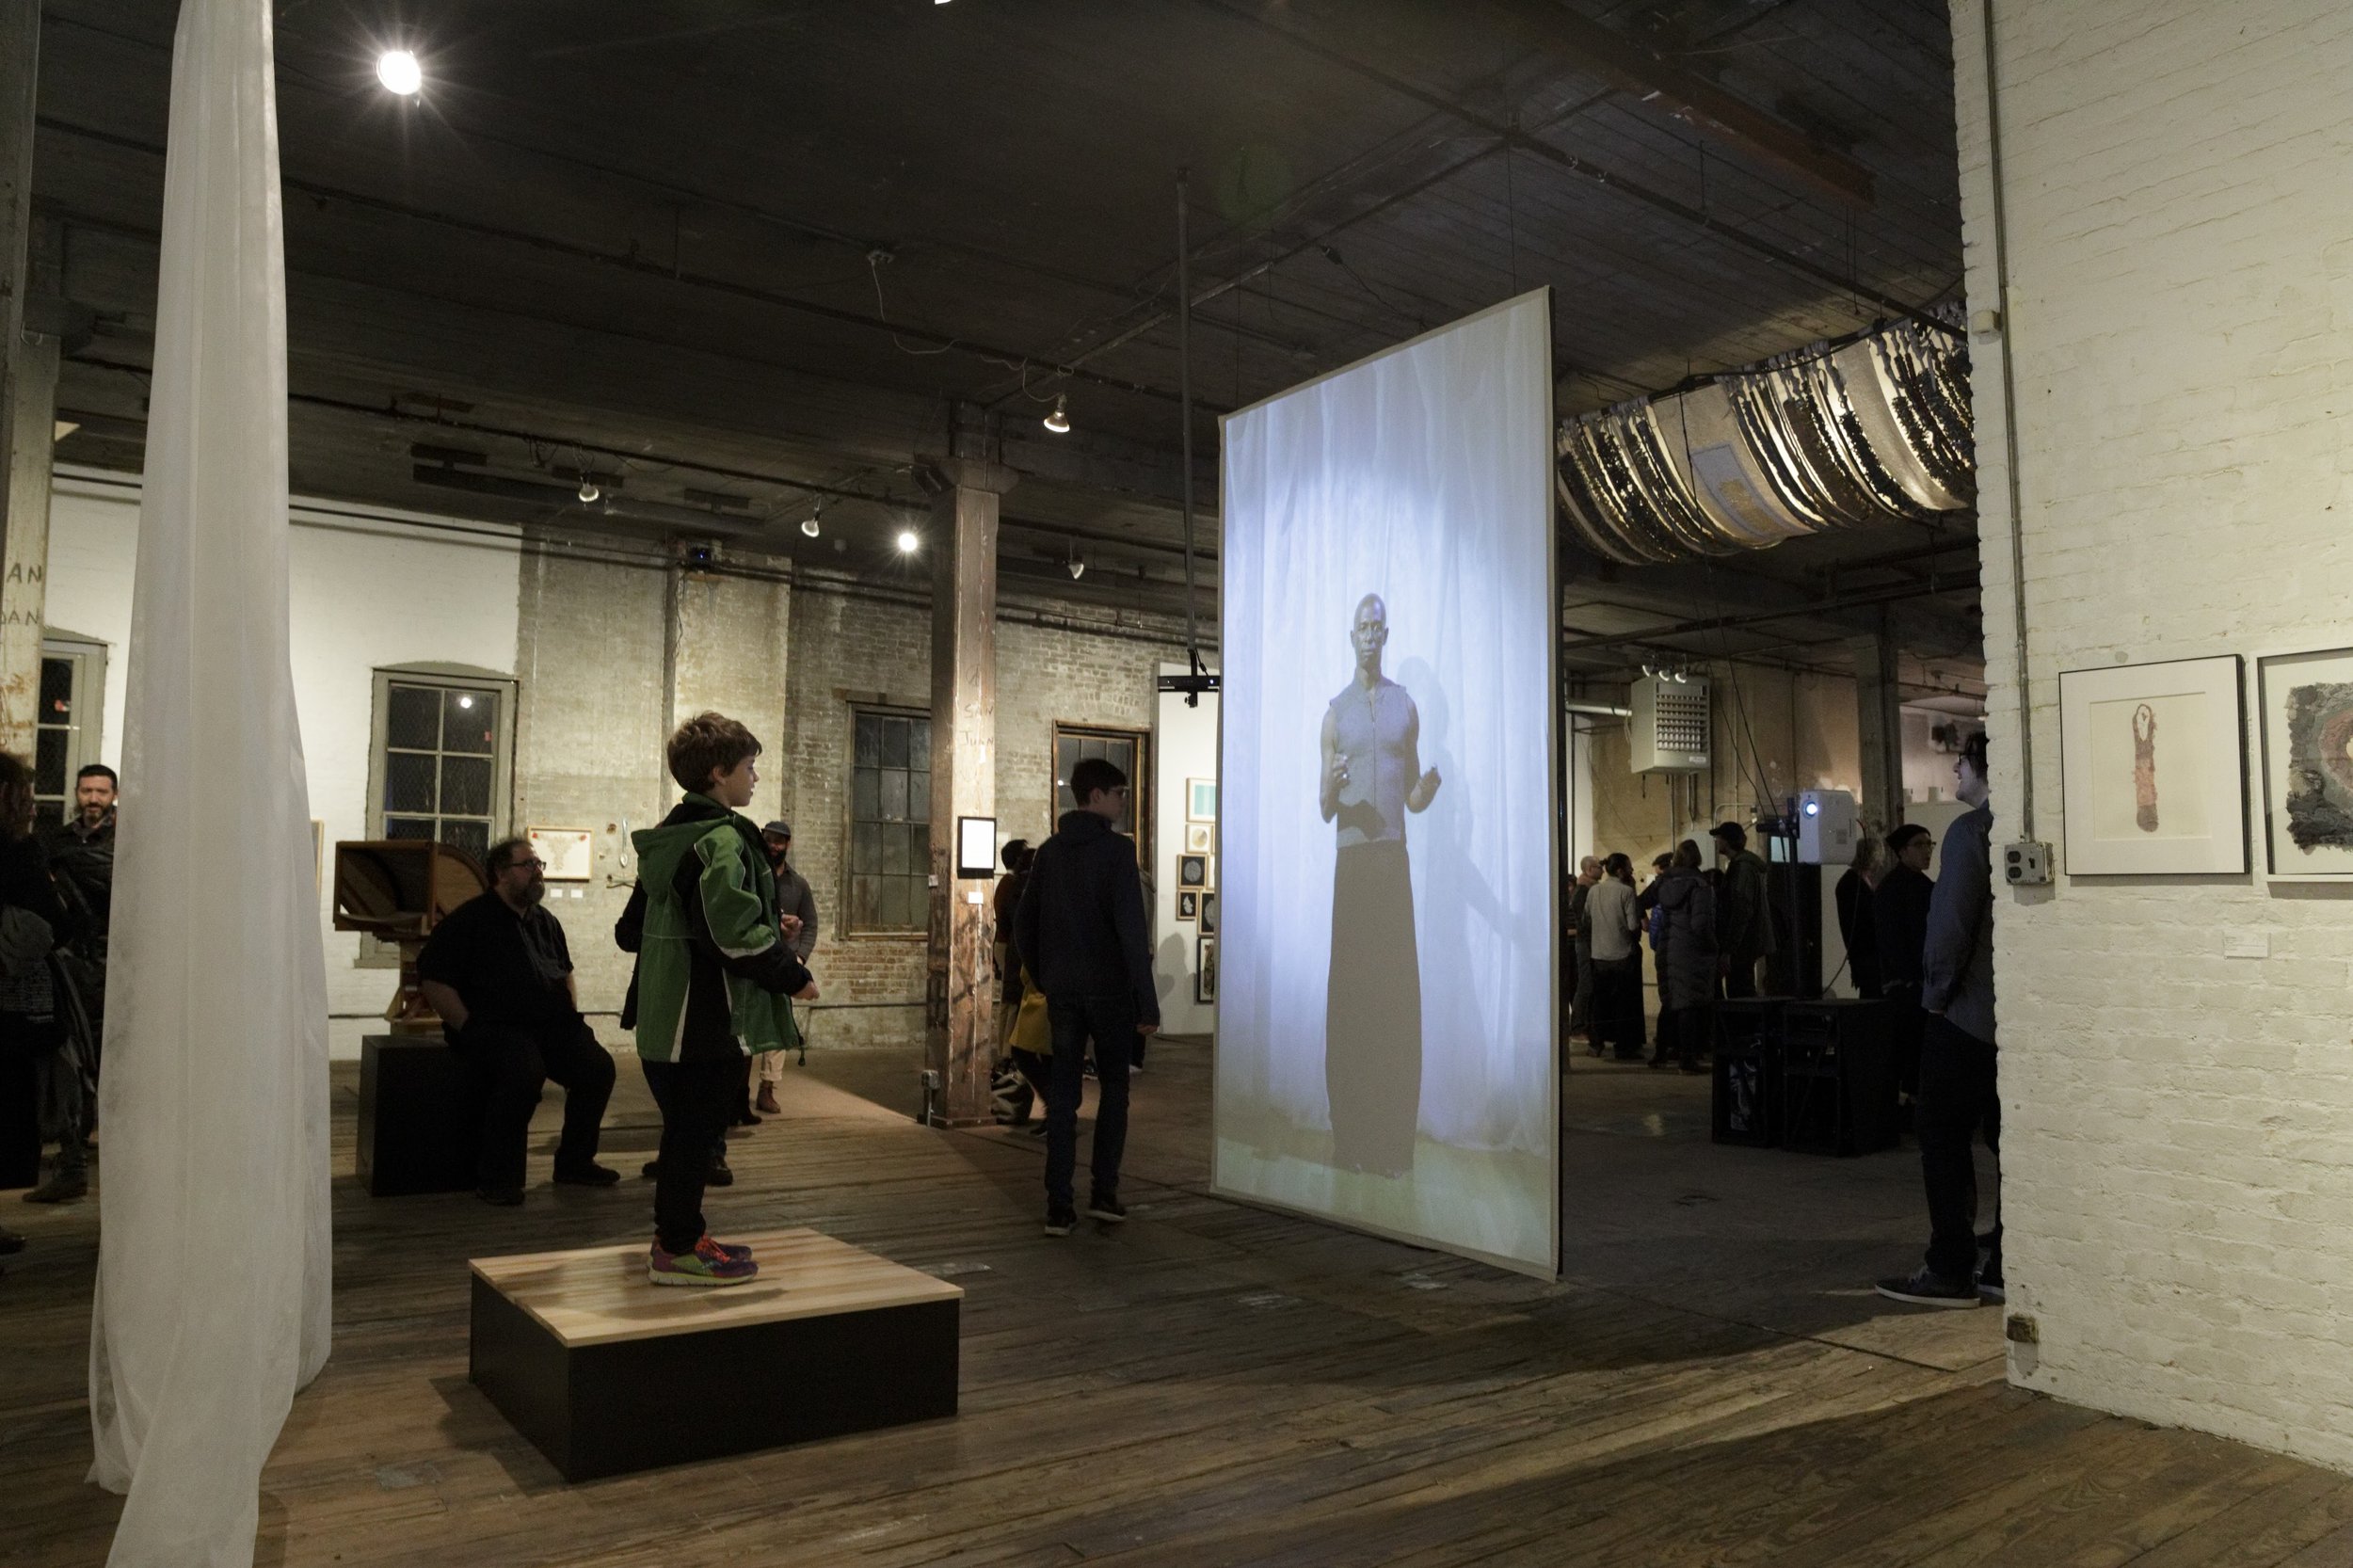 A child stands on a platform and interacts with a video (a performer gesturing in front of a white curtain) during a gallery opening event. 